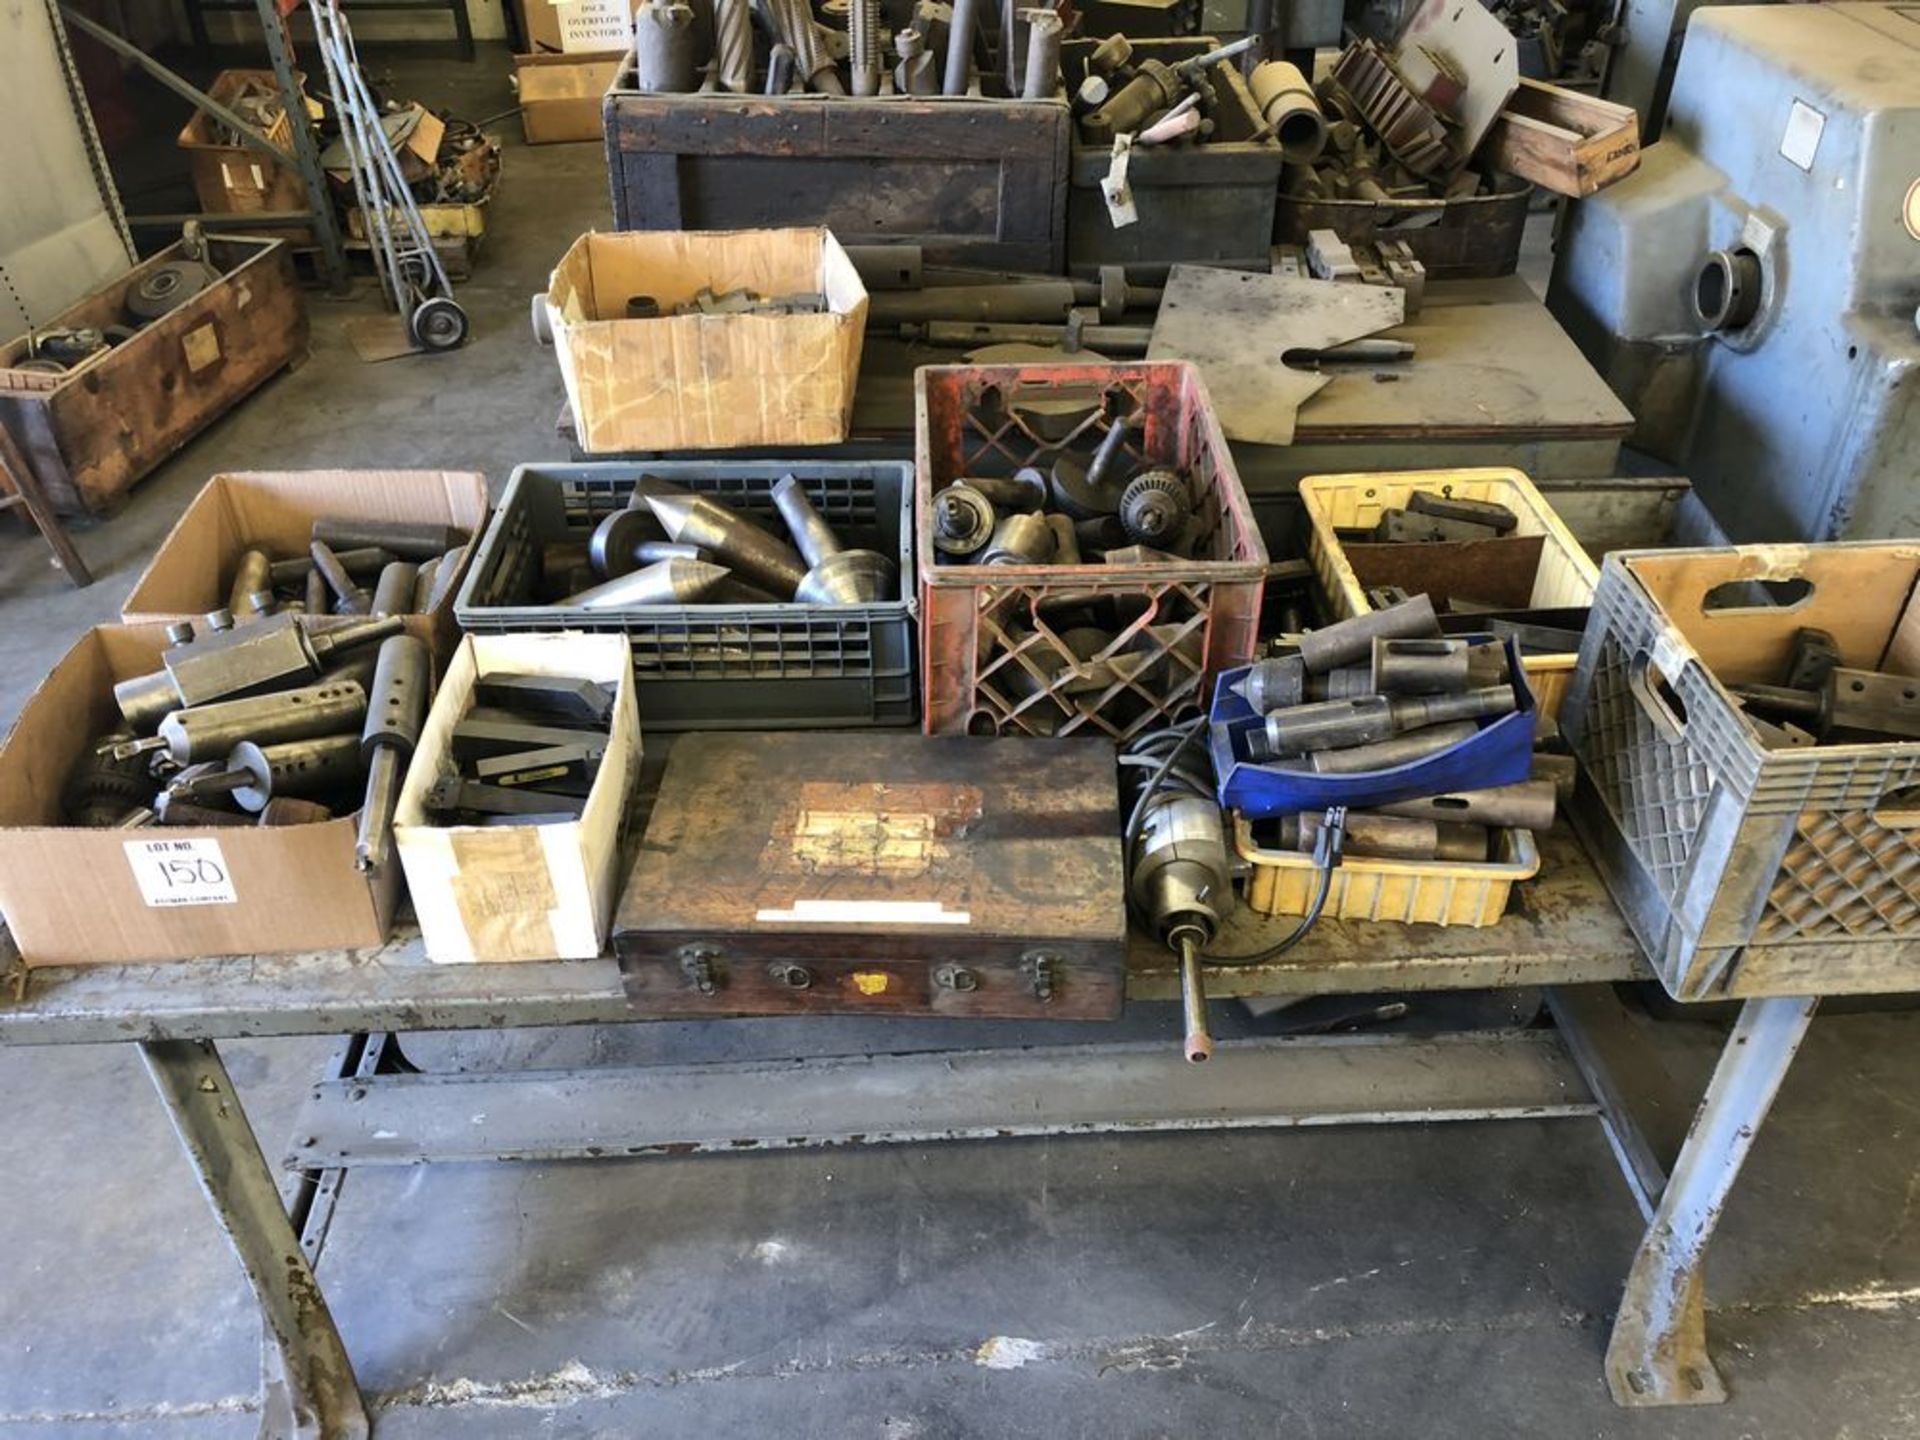 (LOT) LARGE LOT OF LATHE TOOLING- LATHE CUTTERS, LIVE/DEAD CENTERS, RADIUS TURRET